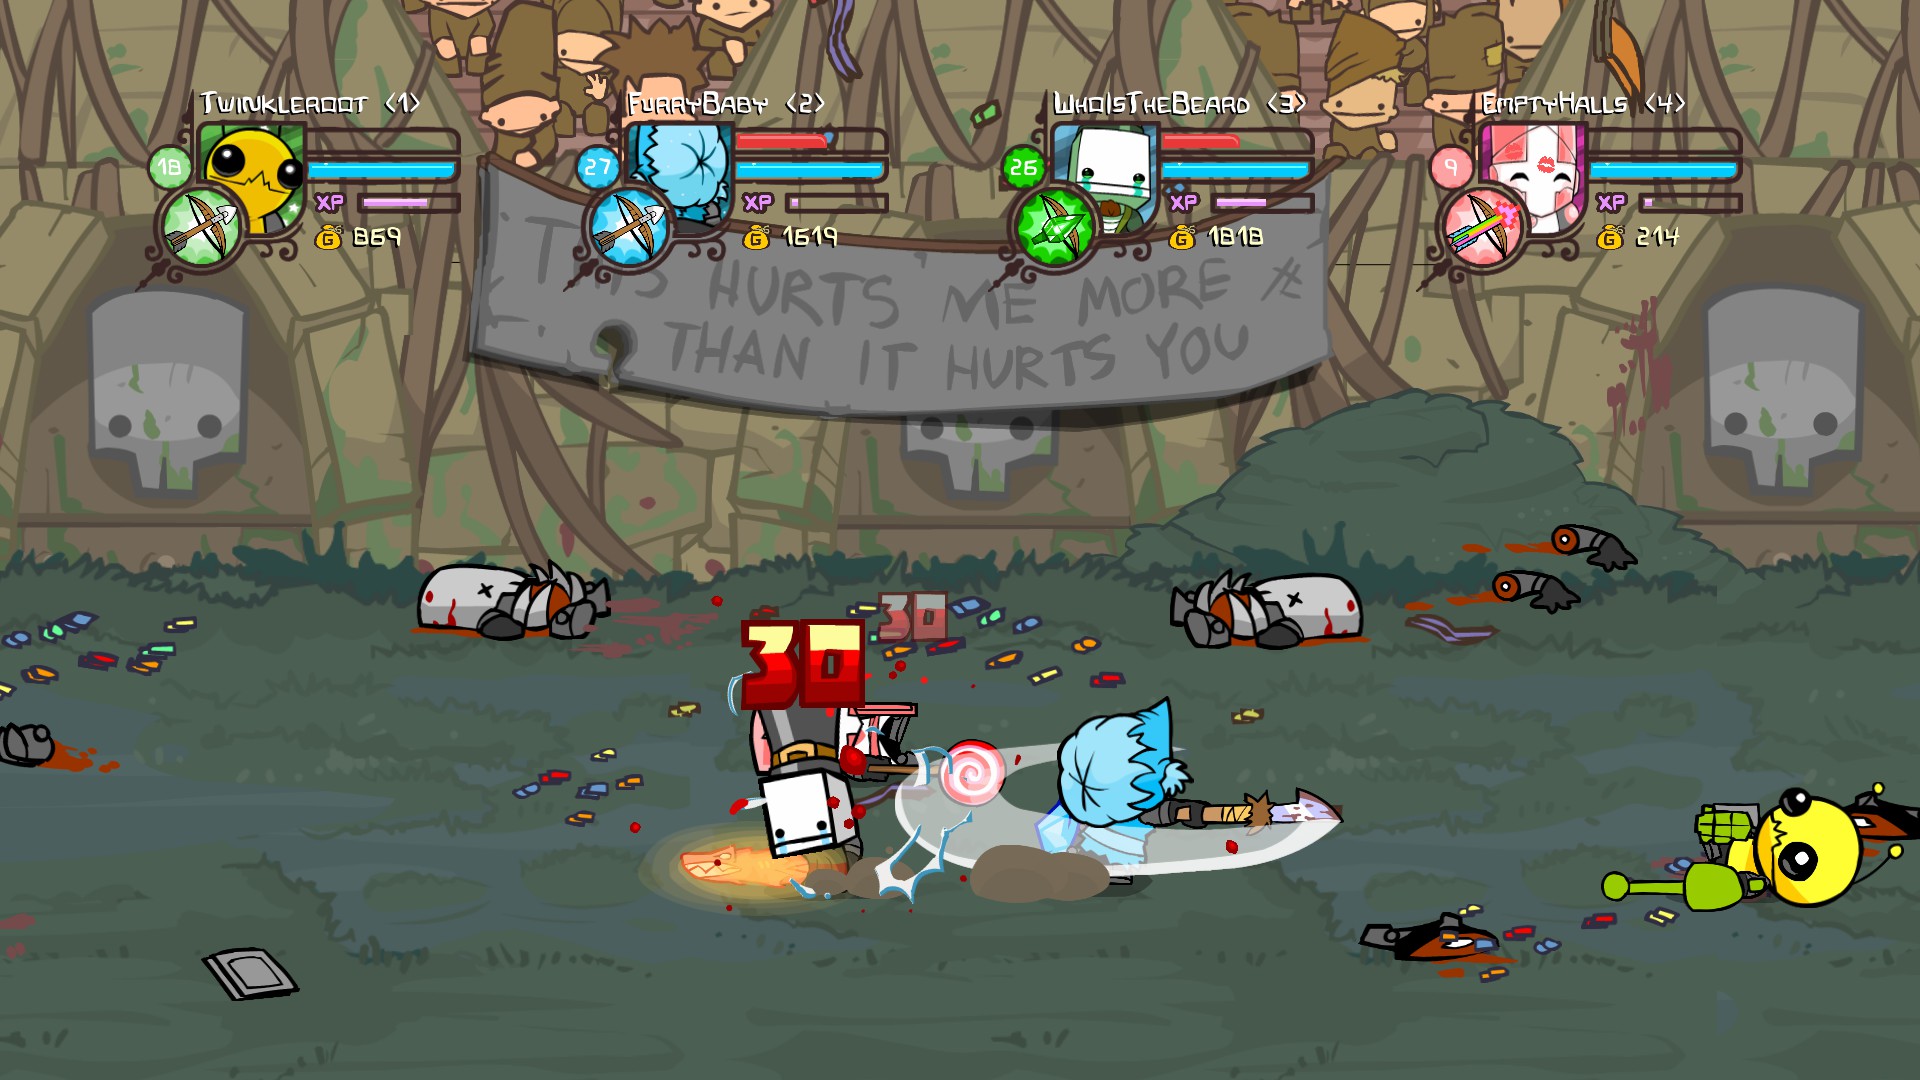 will there be castle crashers 2